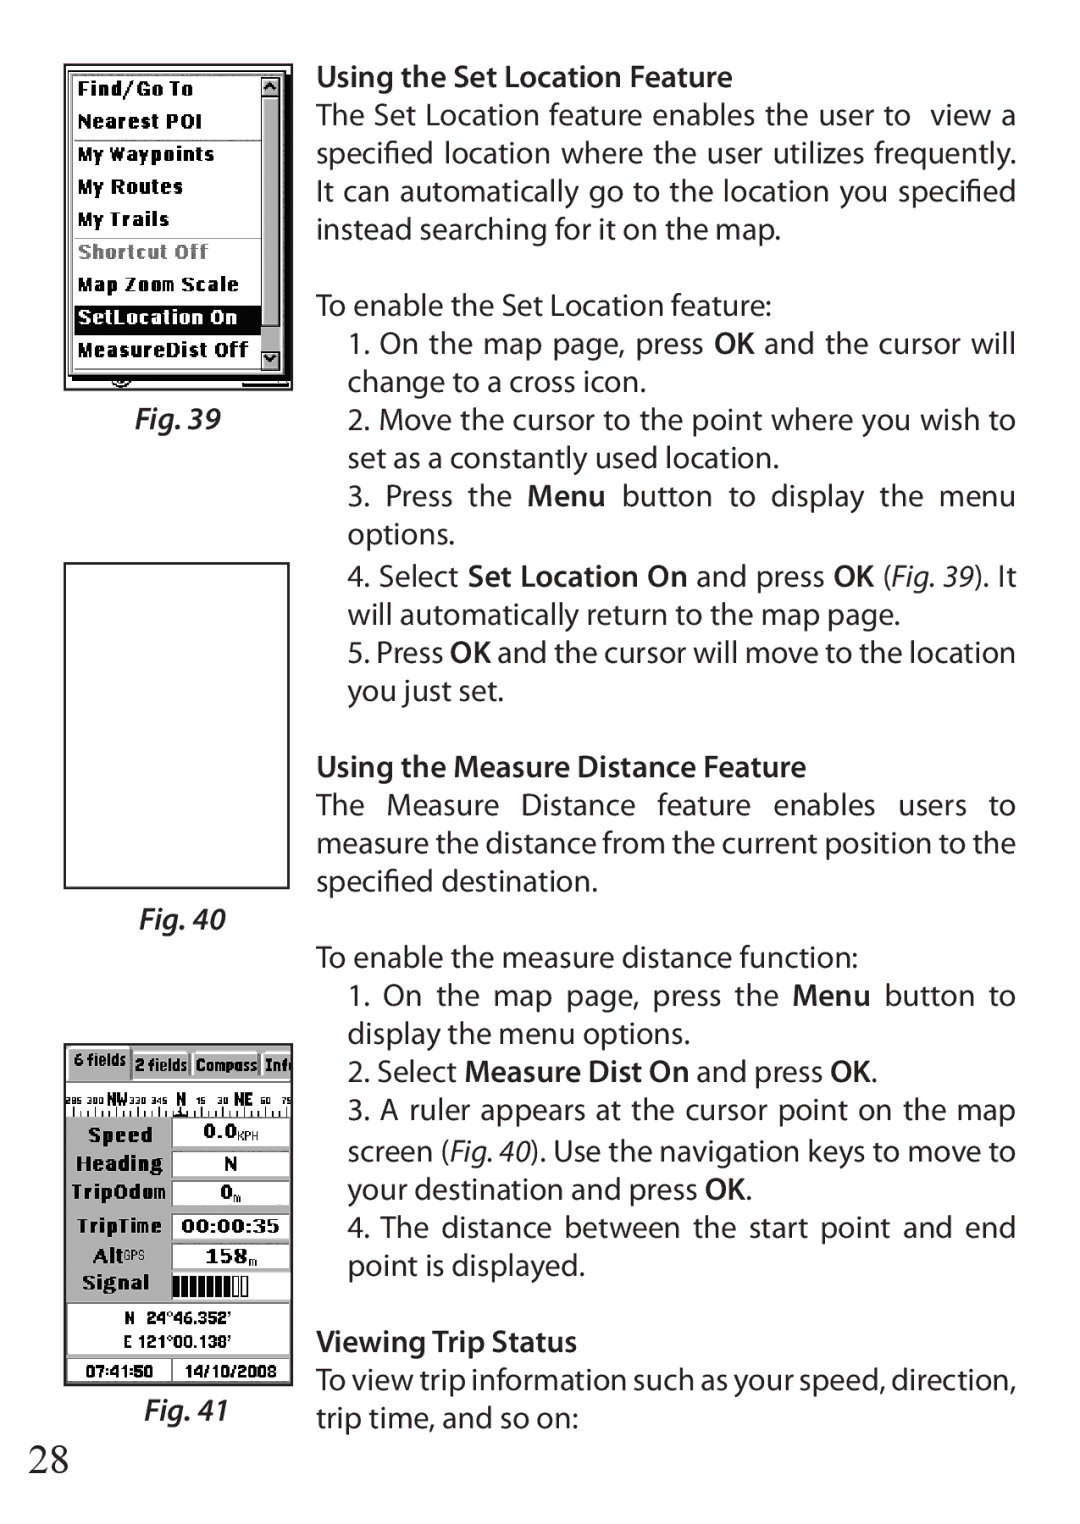 Bushnell 110 instruction manual Using the Set Location Feature, Using the Measure Distance Feature, Viewing Trip Status 